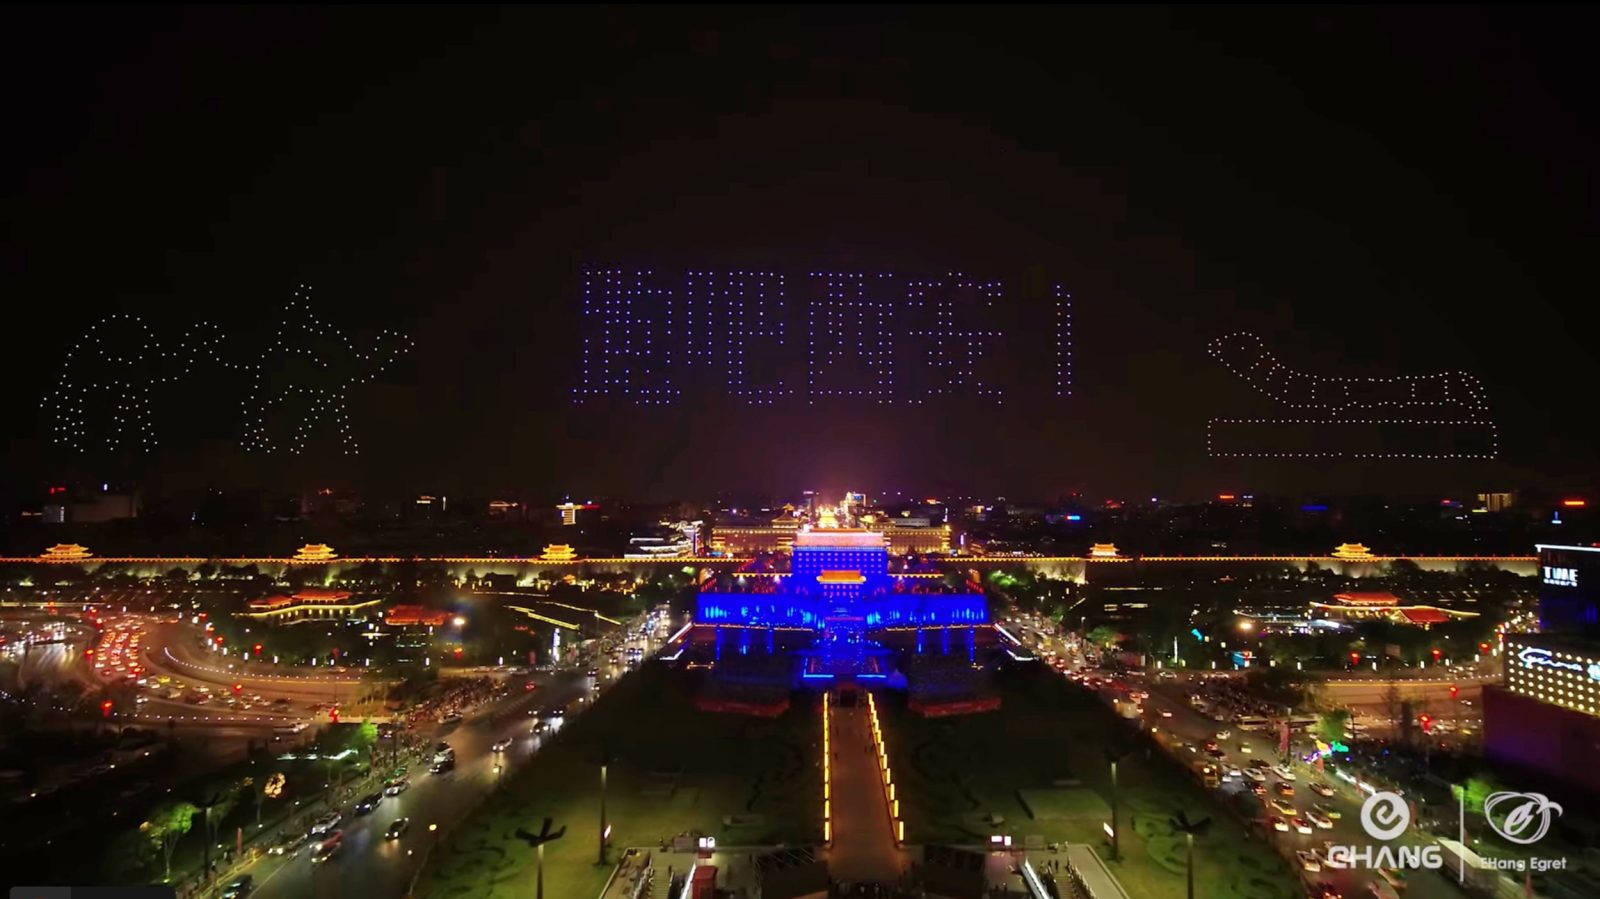 With 1,374 drones, Ehang set a new world record for biggest drone display